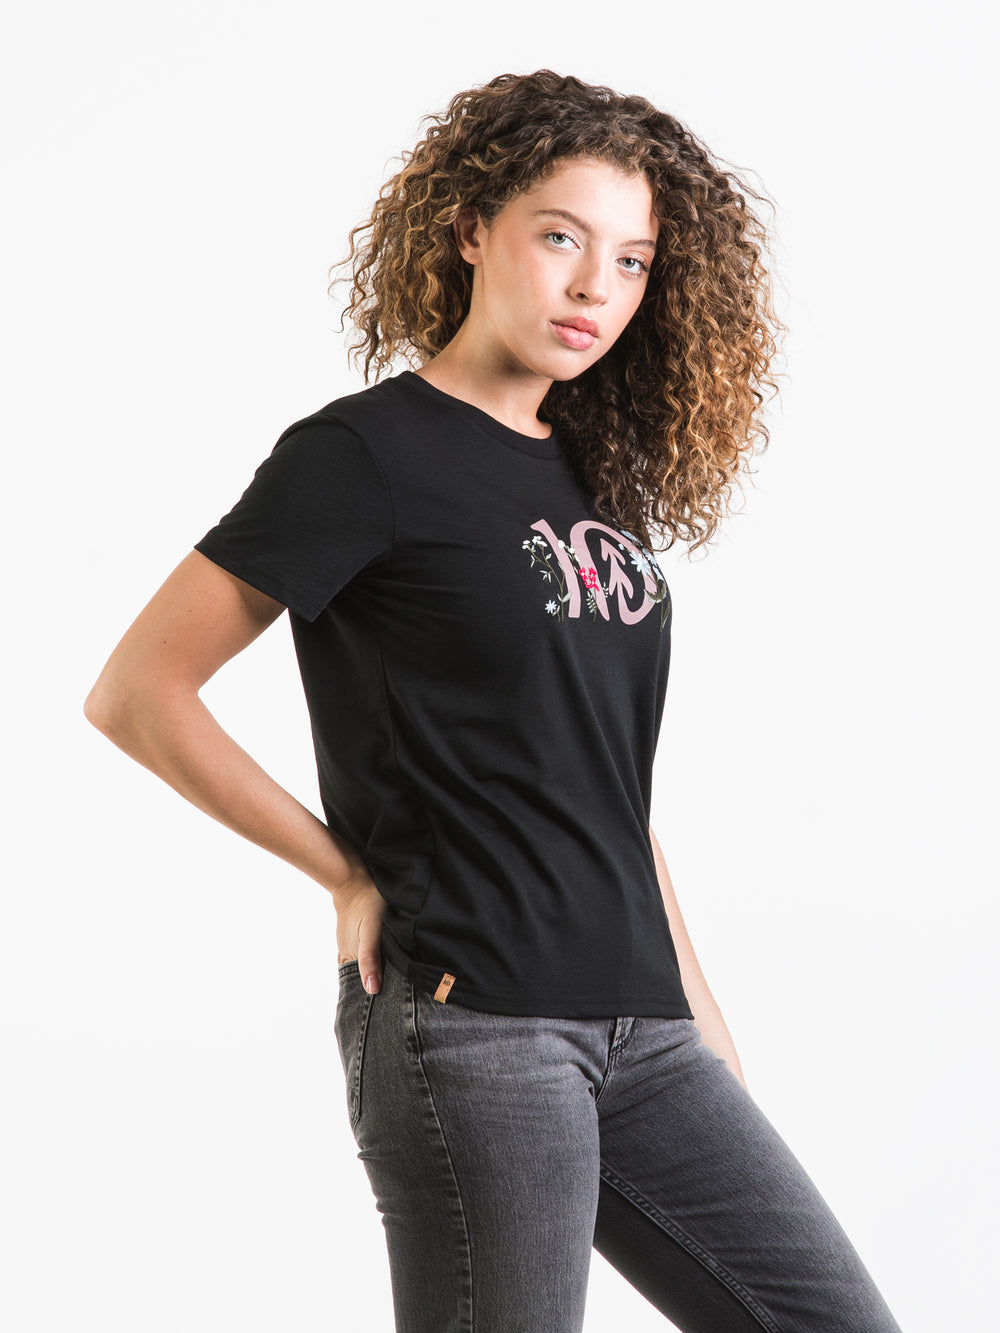 TENTREE FLORAL EMBROIDERED LOGO T-SHIRT - CLEARANCE